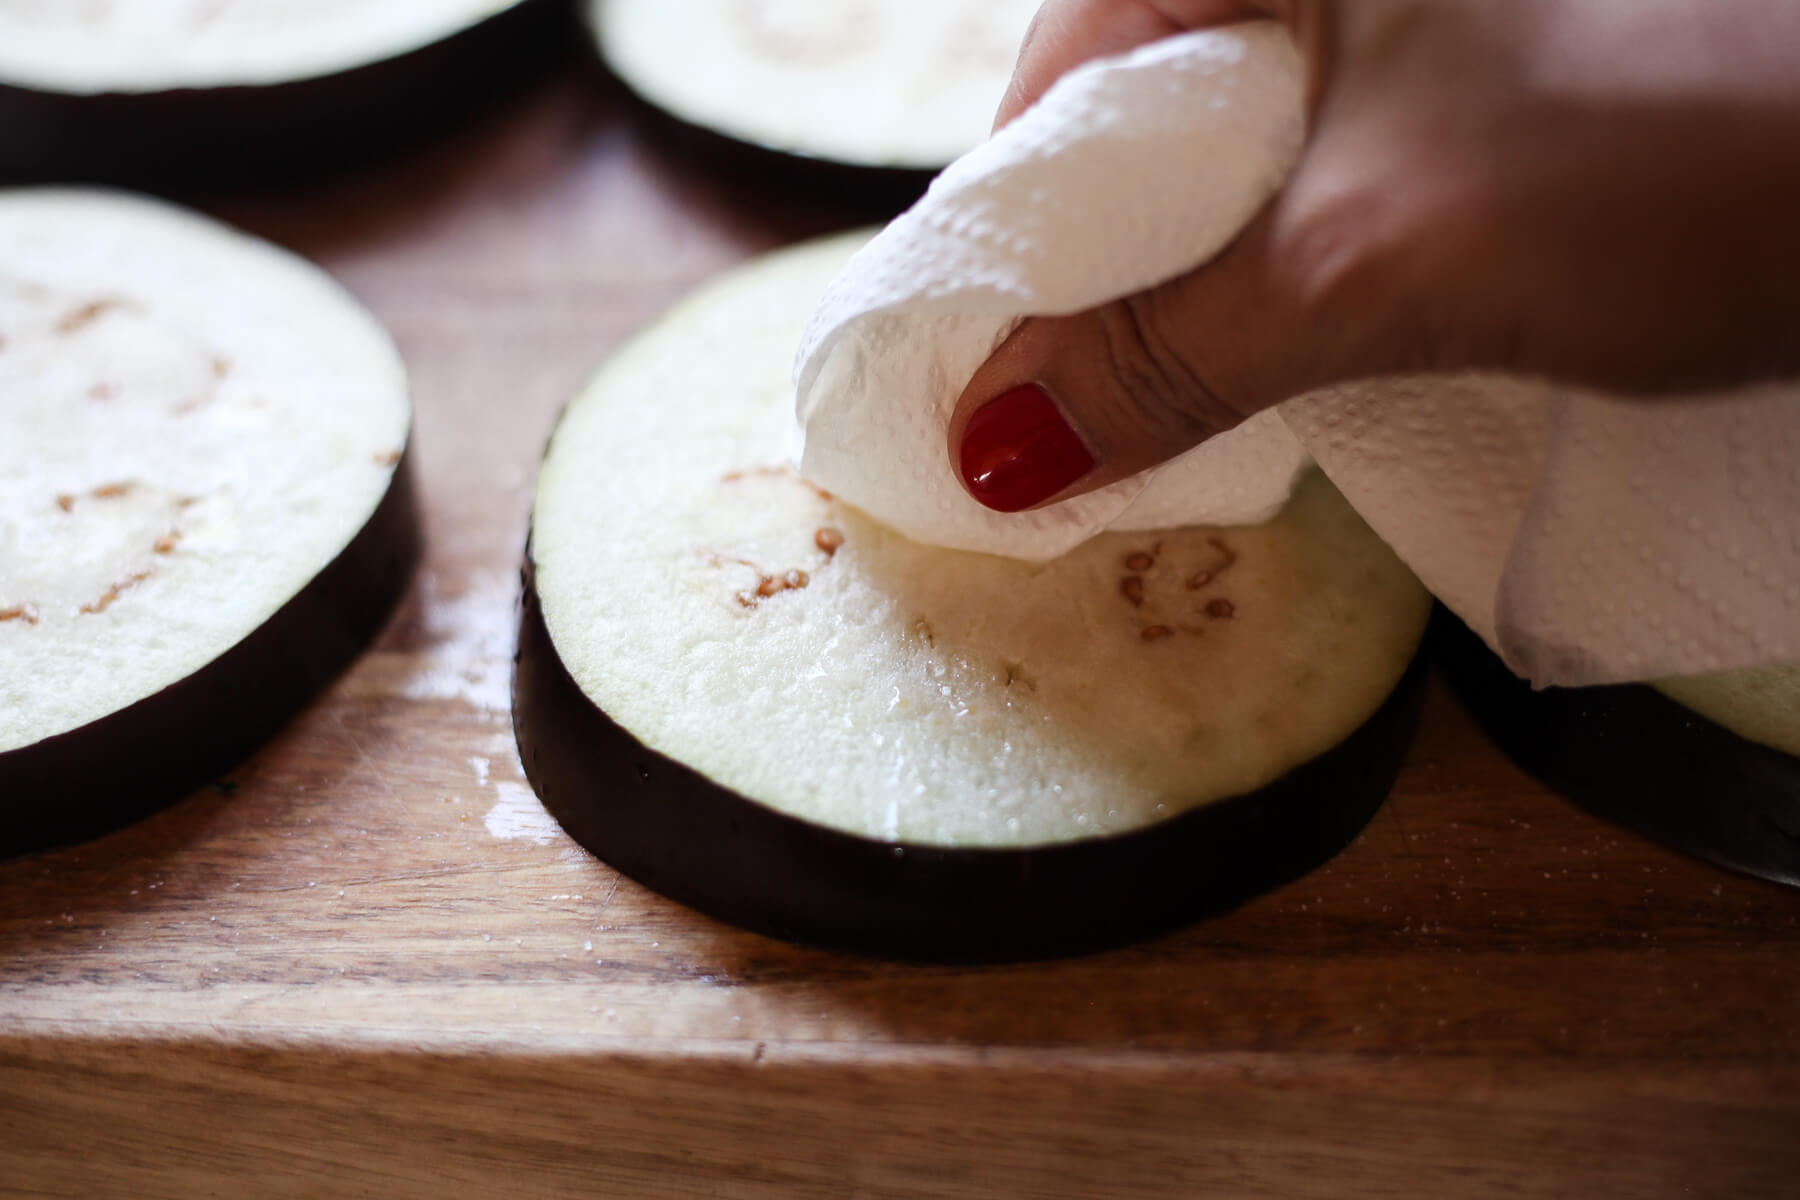 Water and salt is wiped off of a salted eggplant round with a paper towel.